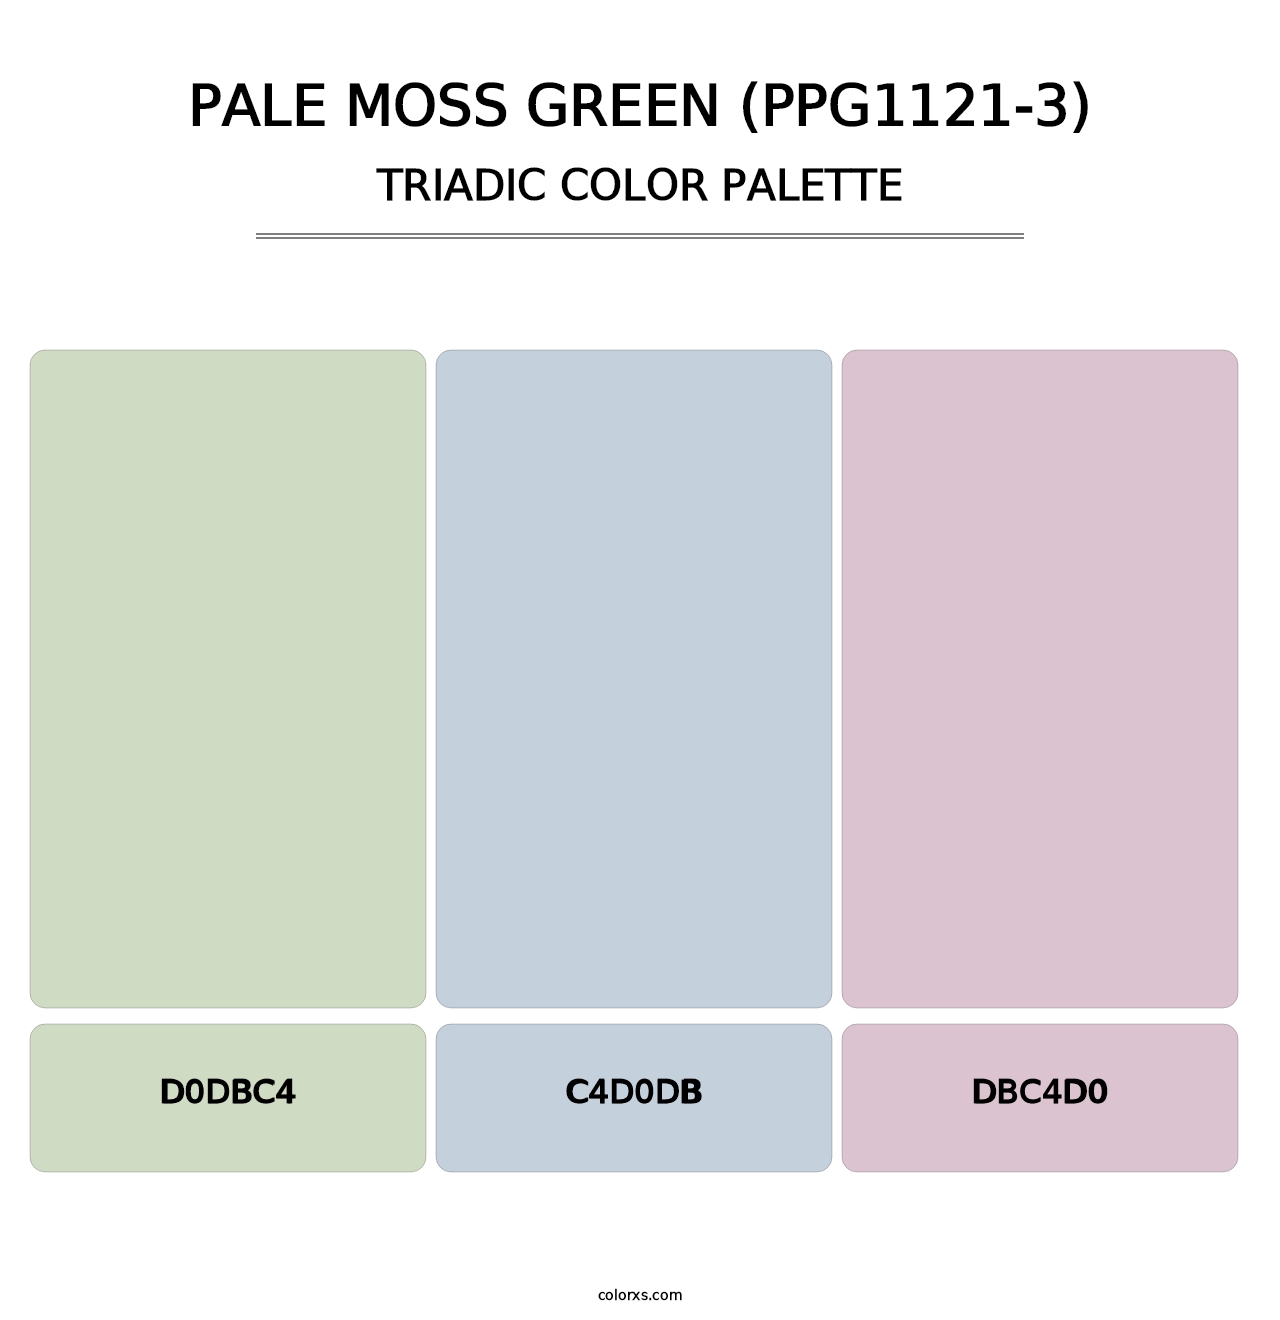 Pale Moss Green (PPG1121-3) - Triadic Color Palette